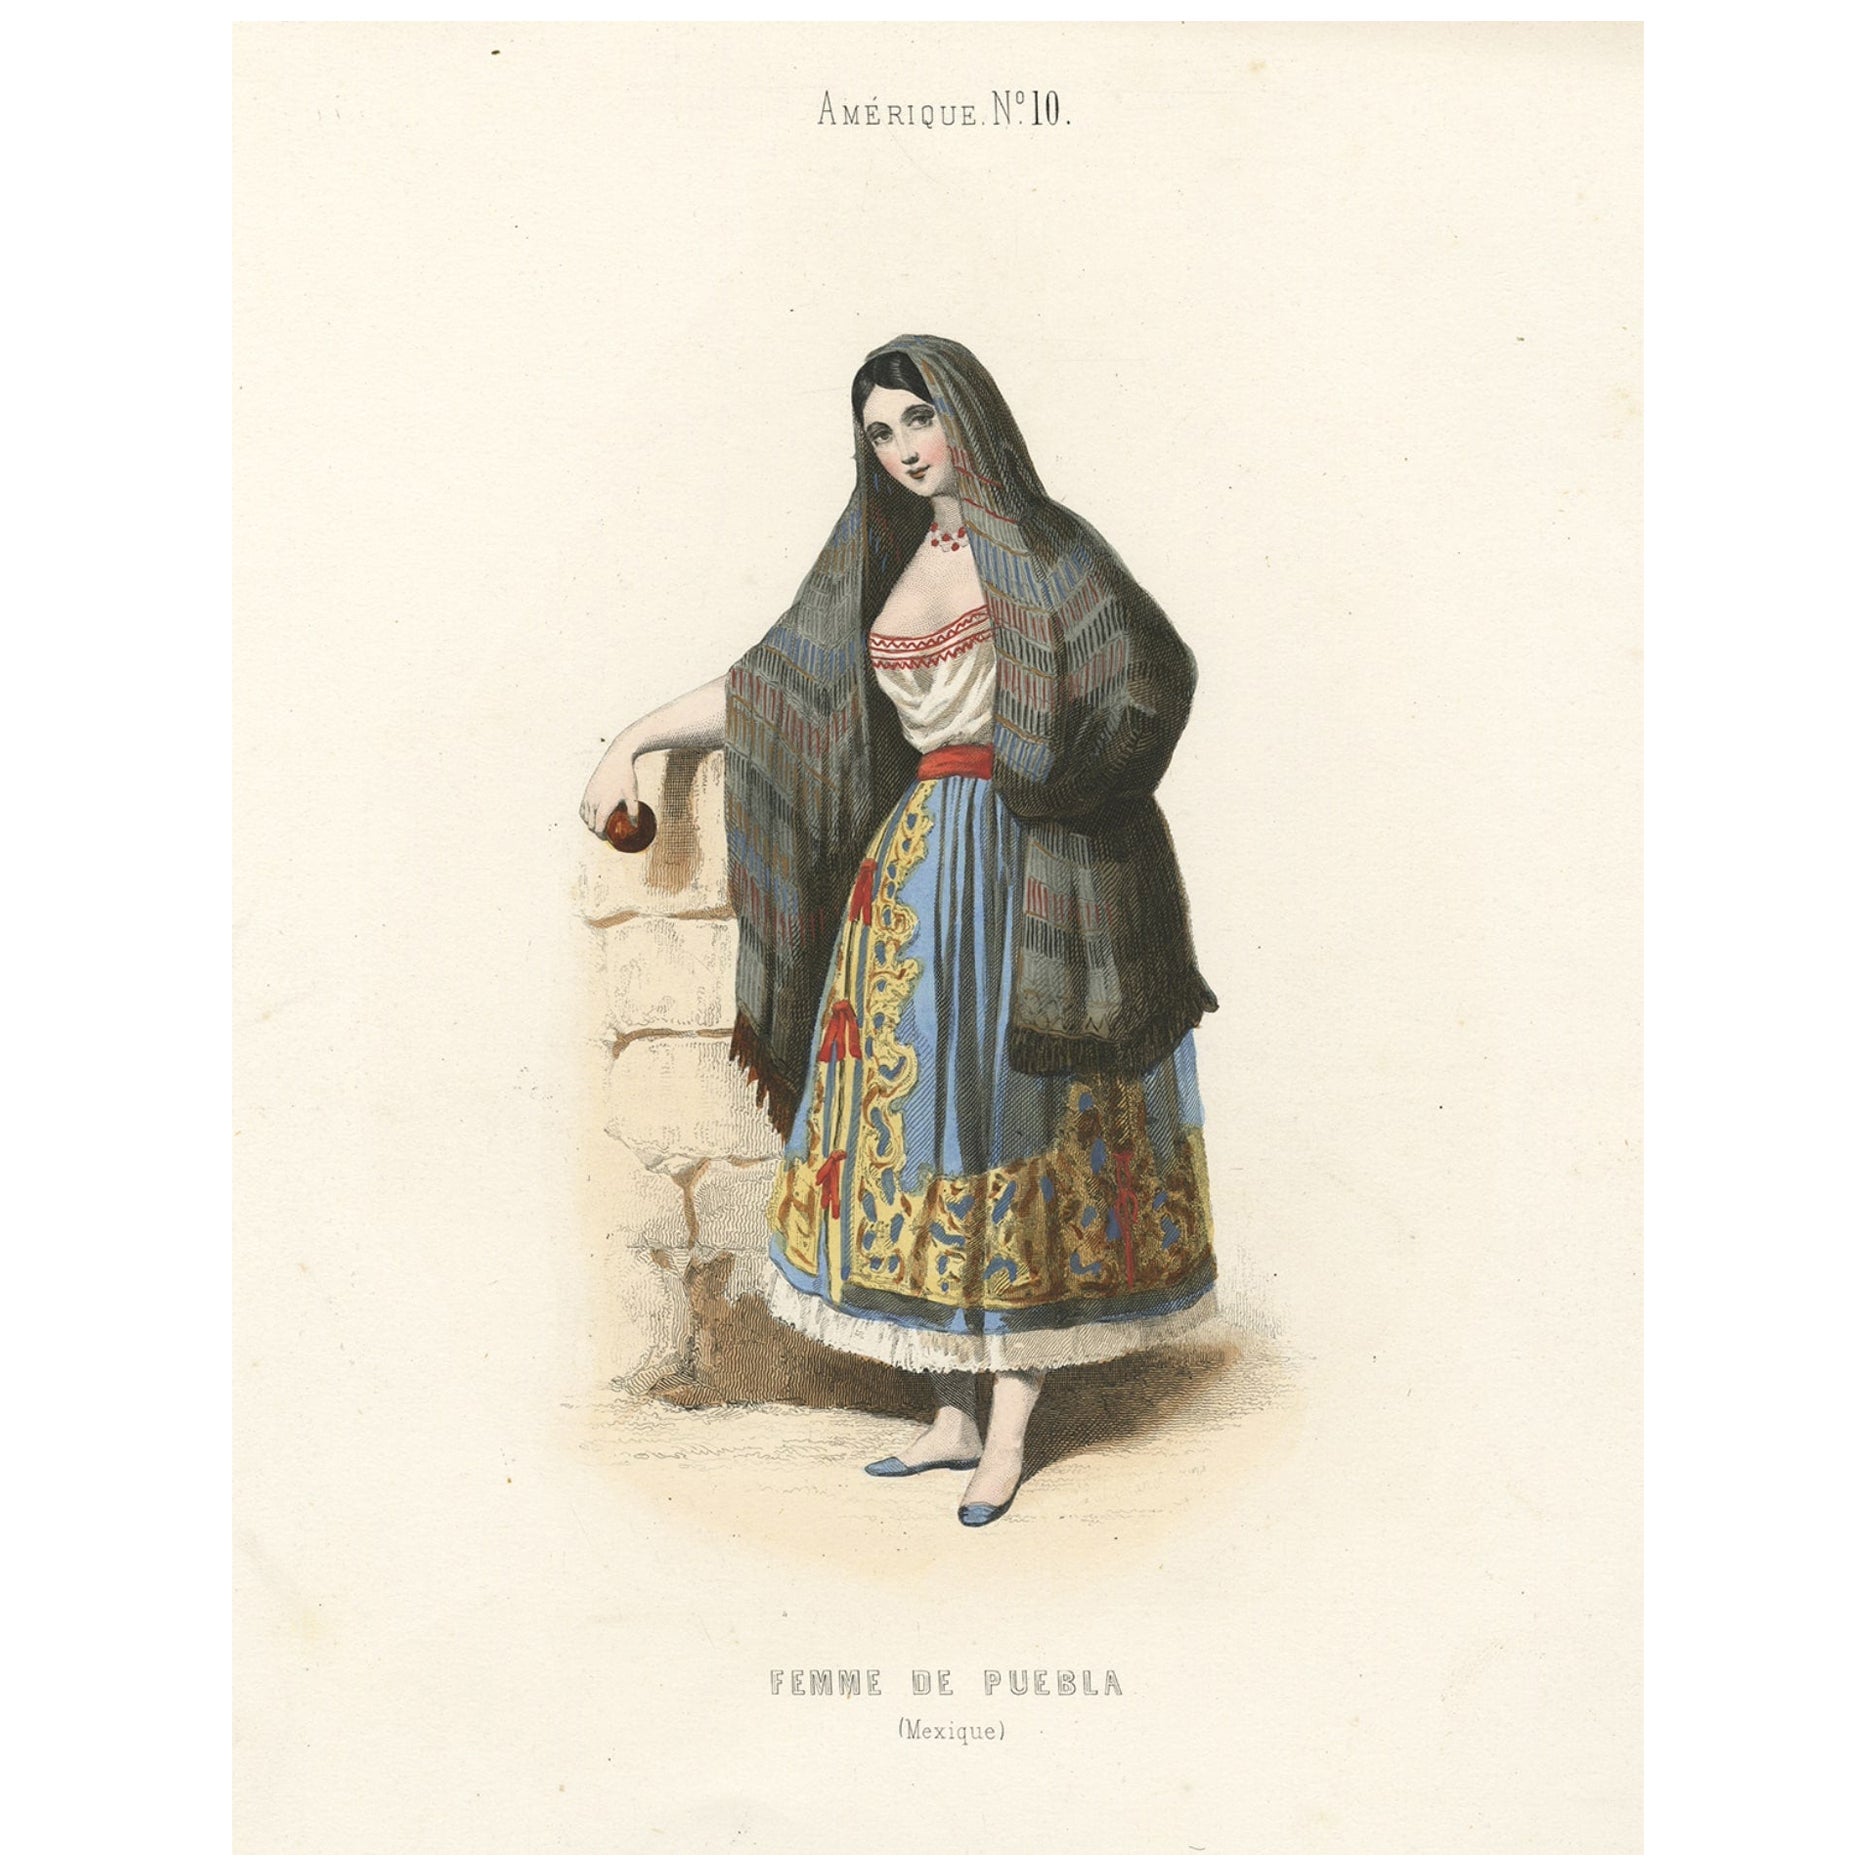 Original Antique Handcolored Print Depicting a Woman from Puebla, Mexico, 1850 For Sale